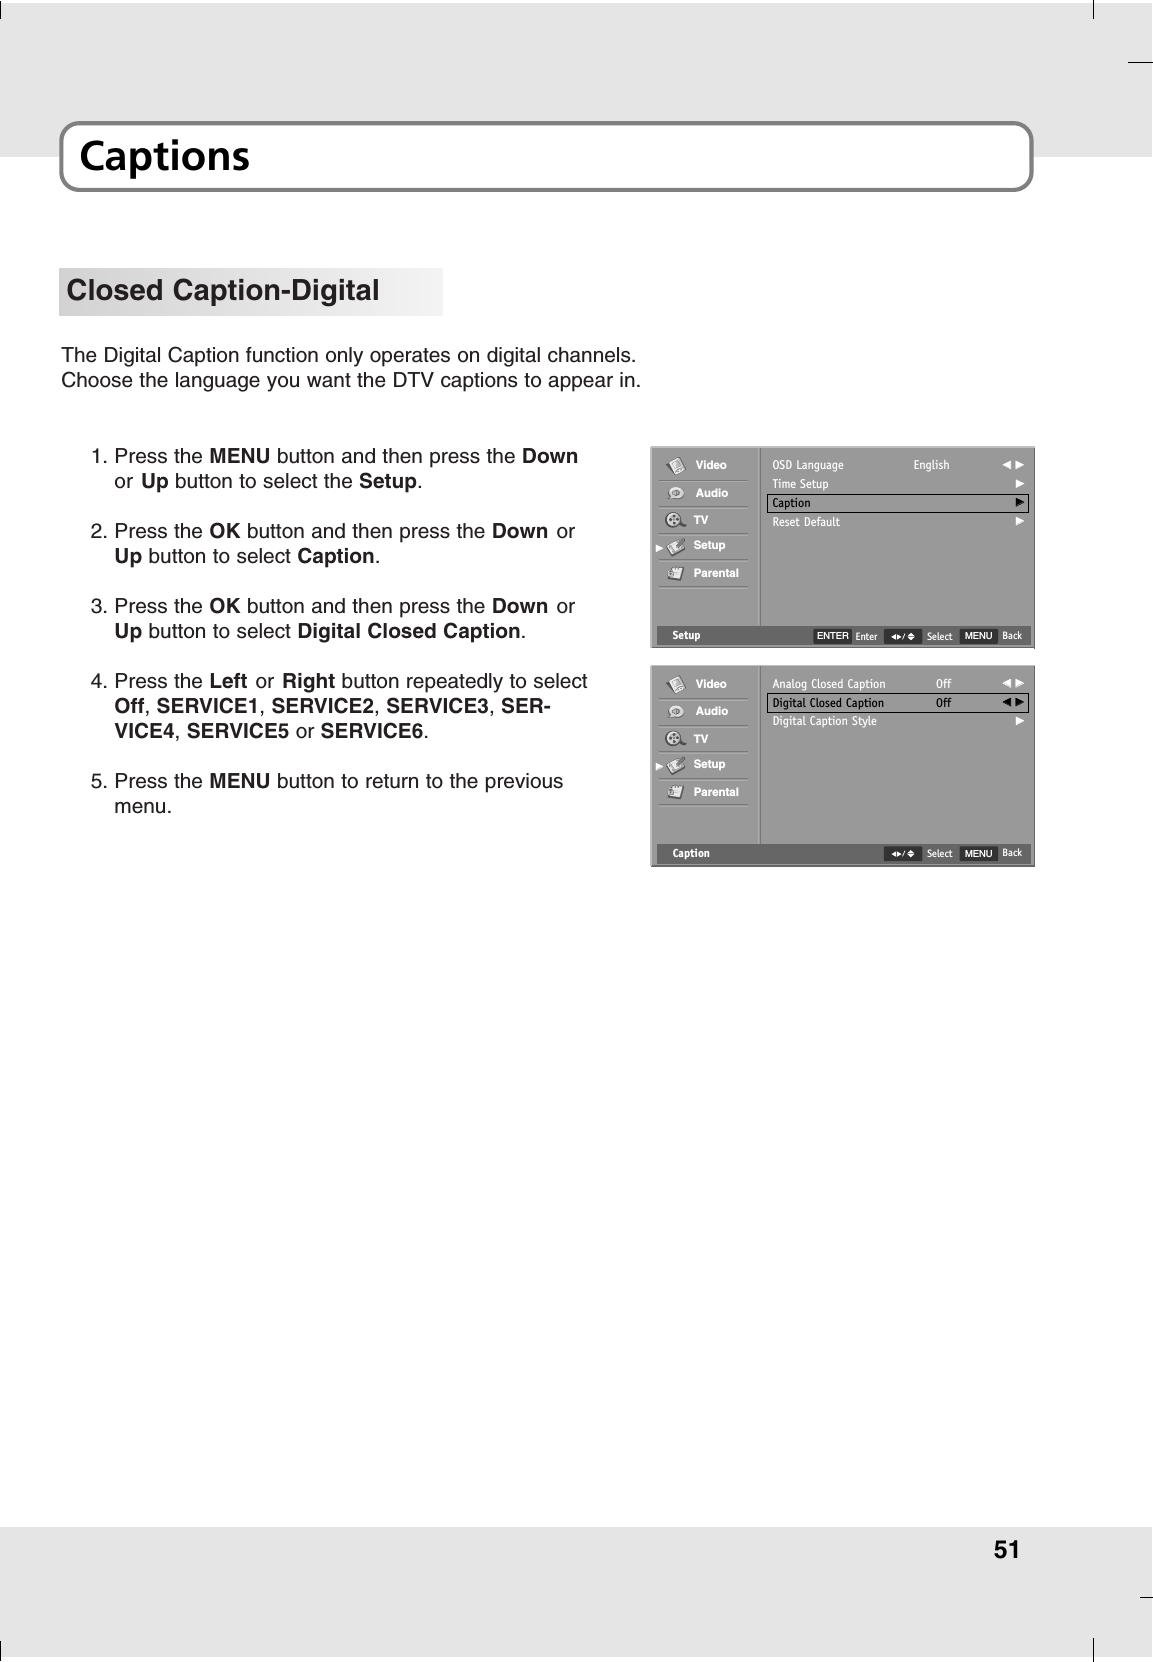 51CaptionsClosed Caption-DigitalThe Digital Caption function only operates on digital channels.Choose the language you want the DTV captions to appear in.1. Press the MENU button and then press the Downor Up button to select the Setup.2. Press the OK button and then press the Down orUp button to select Caption.3. Press the OK button and then press the Down orUp button to select Digital Closed Caption.4. Press the Left or Right button repeatedly to selectOff, SERVICE1,SERVICE2, SERVICE3,SER-VICE4,SERVICE5 or SERVICE6.5. Press the MENU button to return to the previousmenu.Setup MENU BackSelectOSD LanguageTime SetupCaptionReset DefaultEnglish FF  GGGGGGGGVideoAudioTVSetupParentalGGENTER EnterCaption MENU BackSelectAnalog Closed CaptionDigital Closed CaptionDigital Caption StyleOffOffFF  GGFF  GGGGVideoAudioTVSetupParentalGG